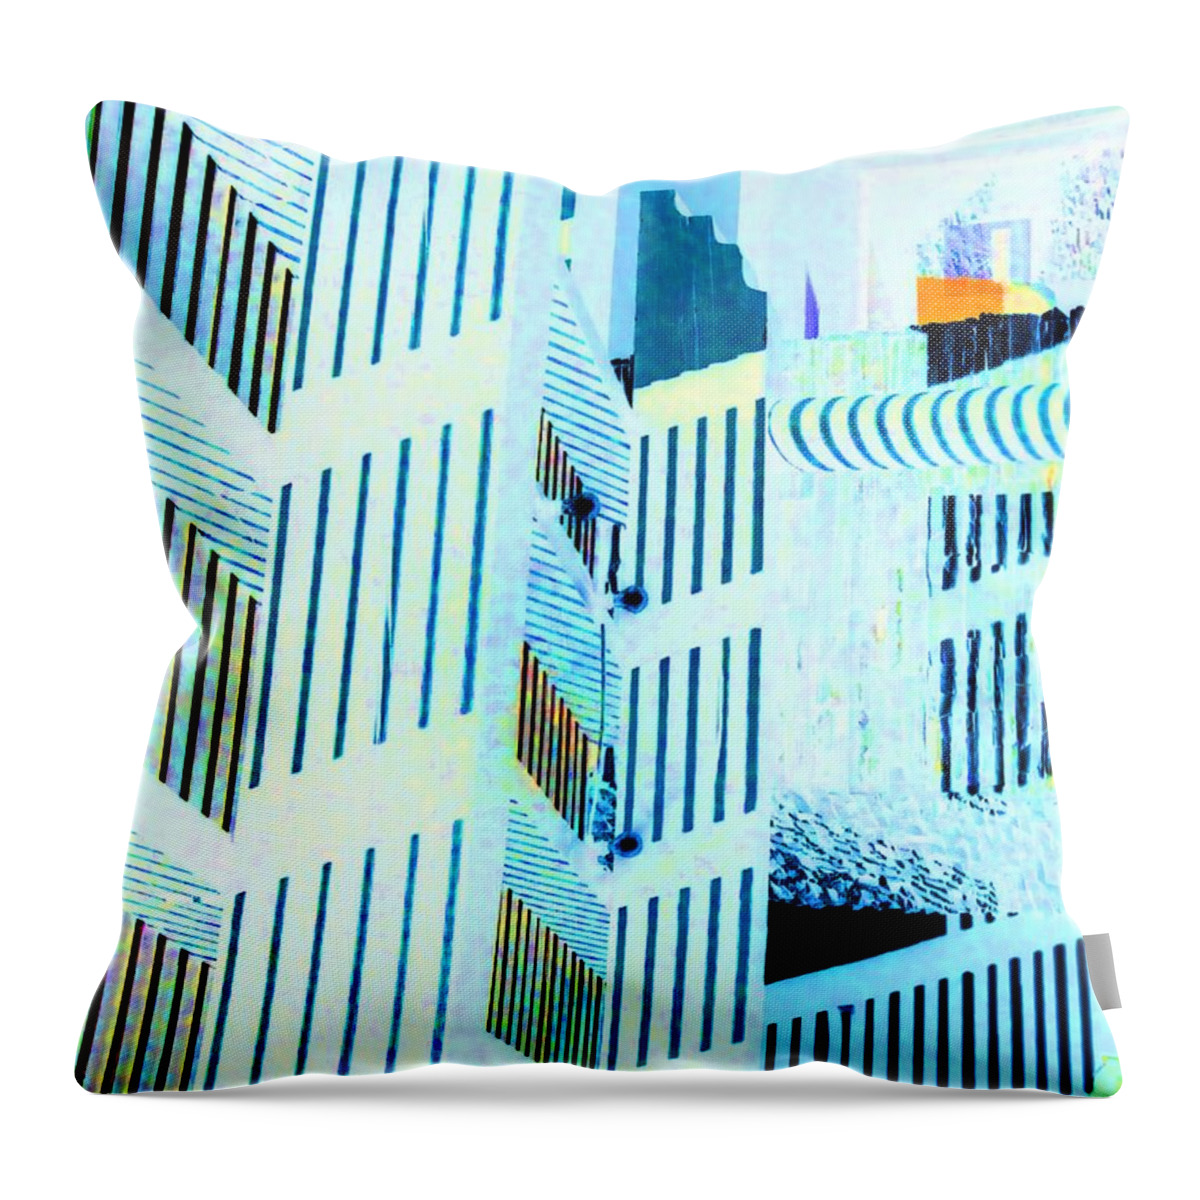 Abstract Throw Pillow featuring the digital art Urban Abstraction by T Oliver